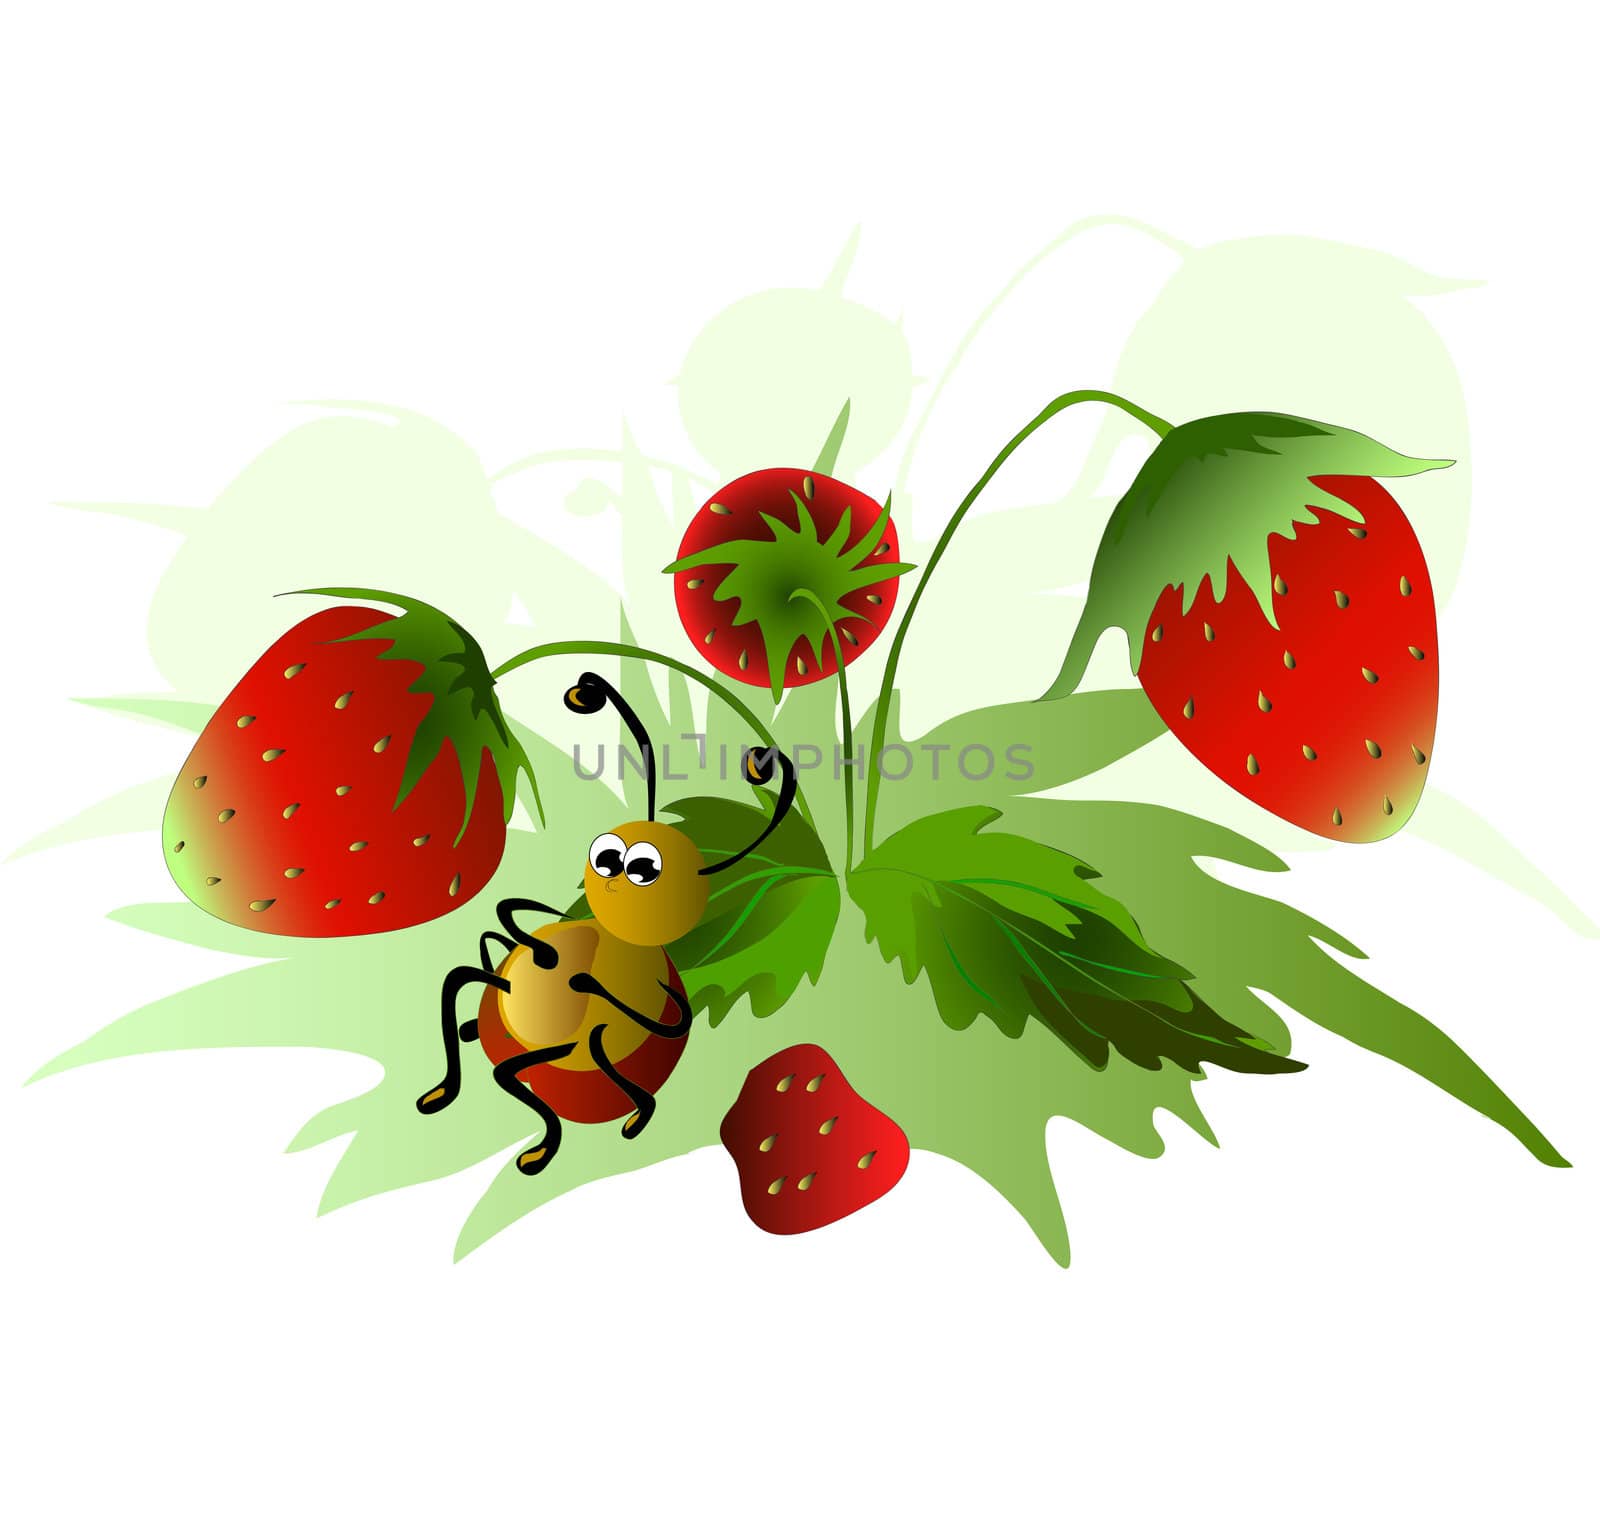 beetle with a belly full of the meadow with strawberries